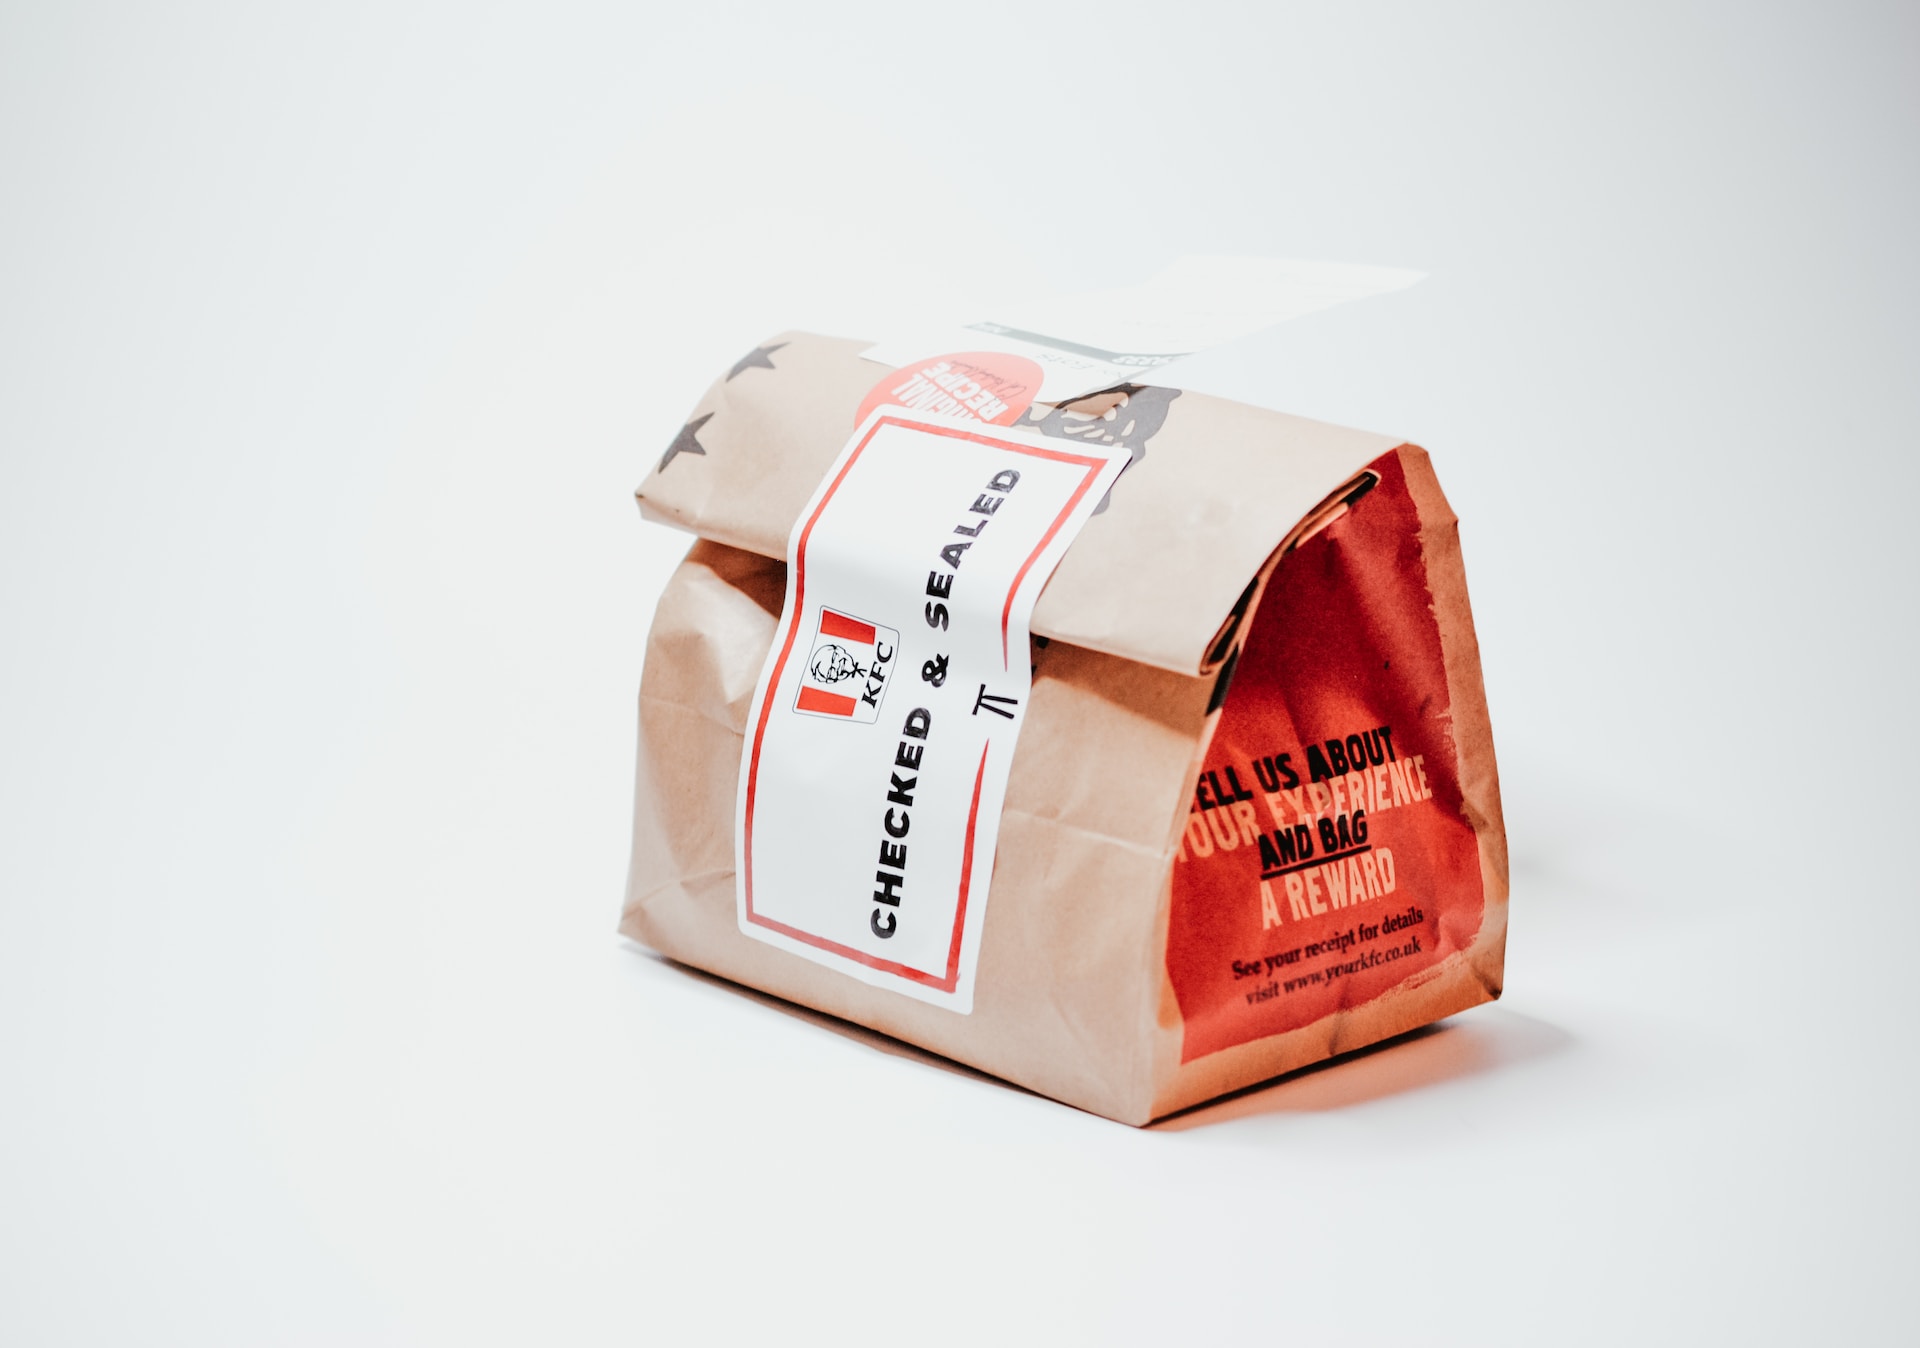 Kentucky Fried Chicken packaged for delivery or pickup